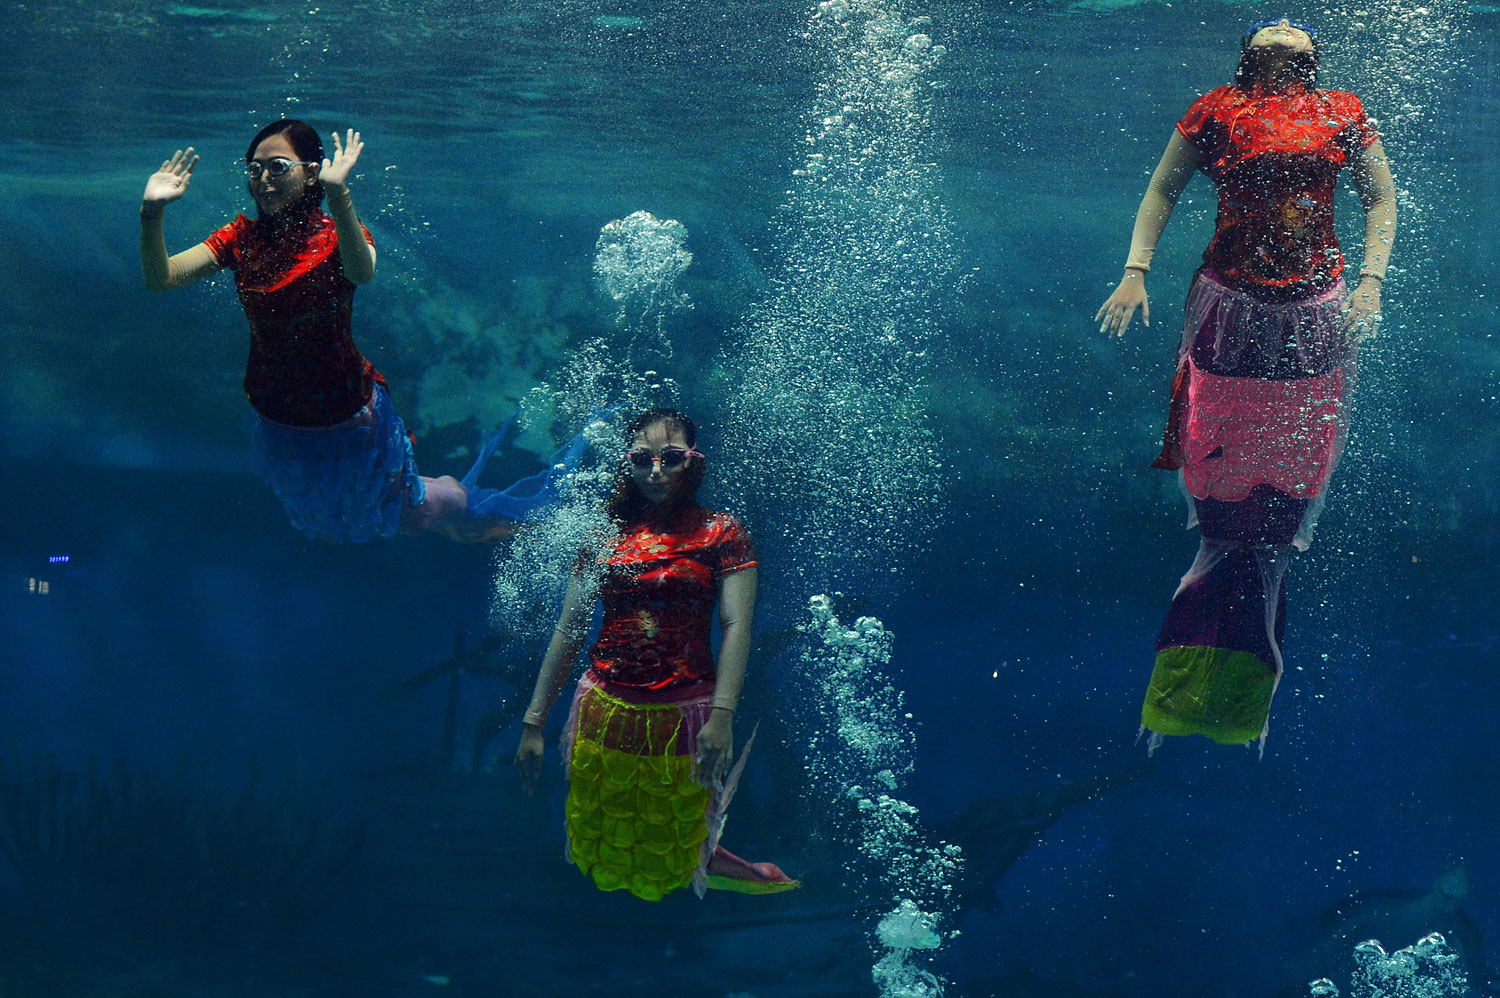 Indonesian performers dressed as mermaids wearing traditional Chinese cheongsam dress perform underwater in a special program celebrating the Lunar New Year at Jakarta's Ancol park on Jan. 31, 2014.